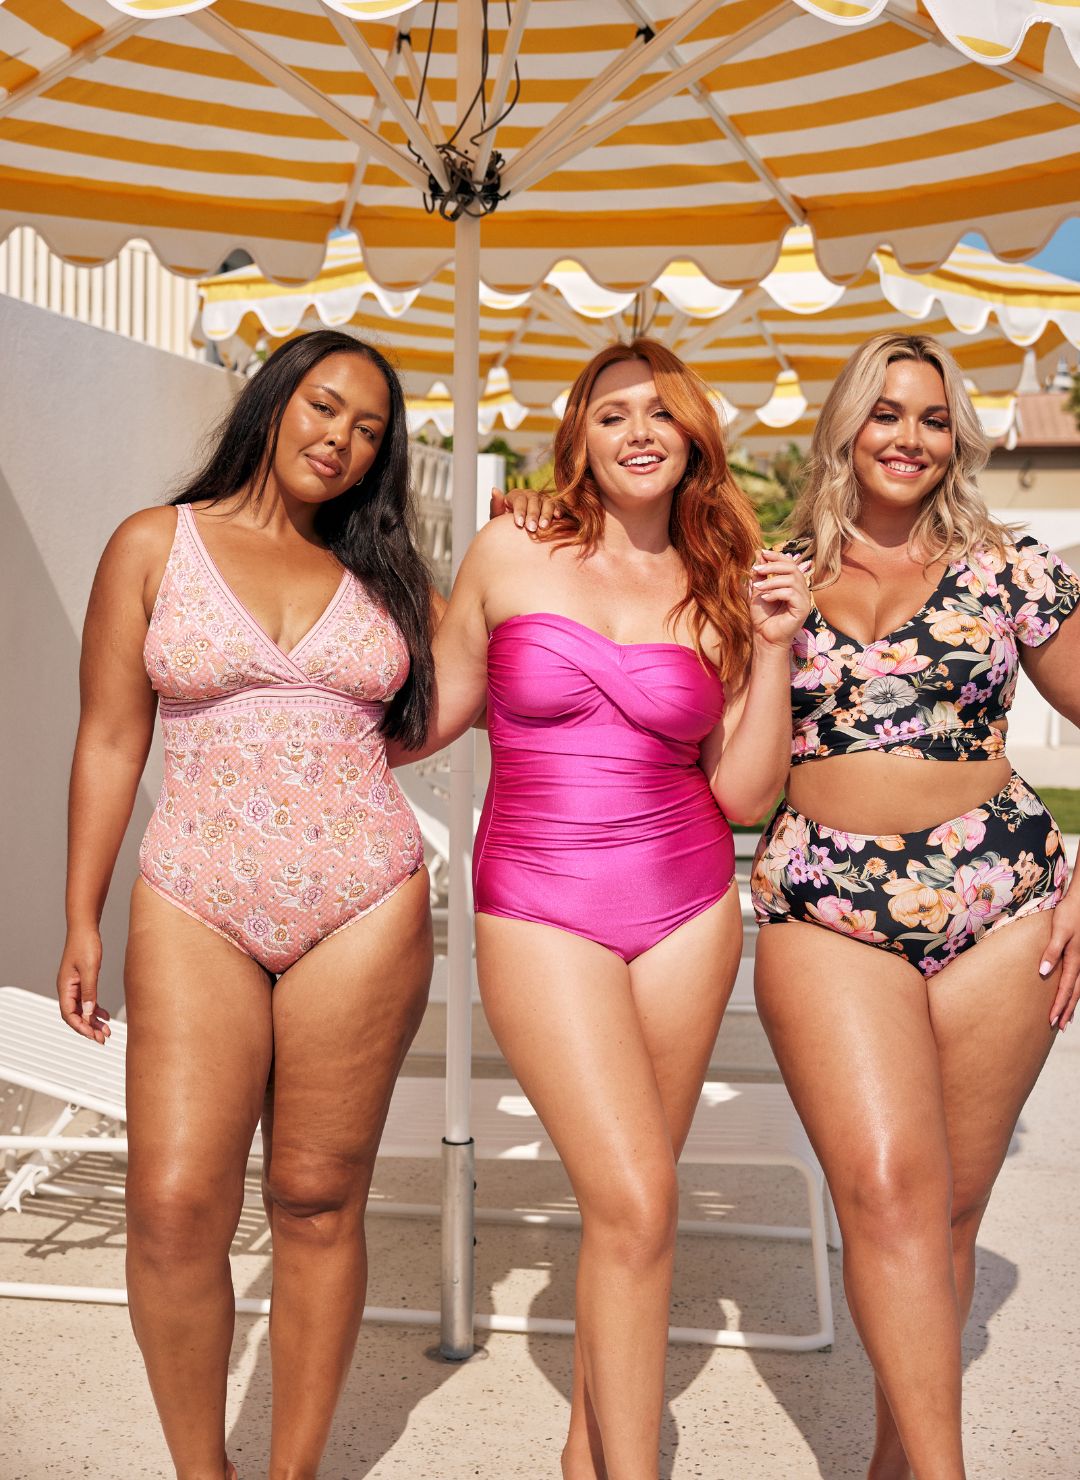 Plus Size Models Should Represent More Body Types Than Hourglass